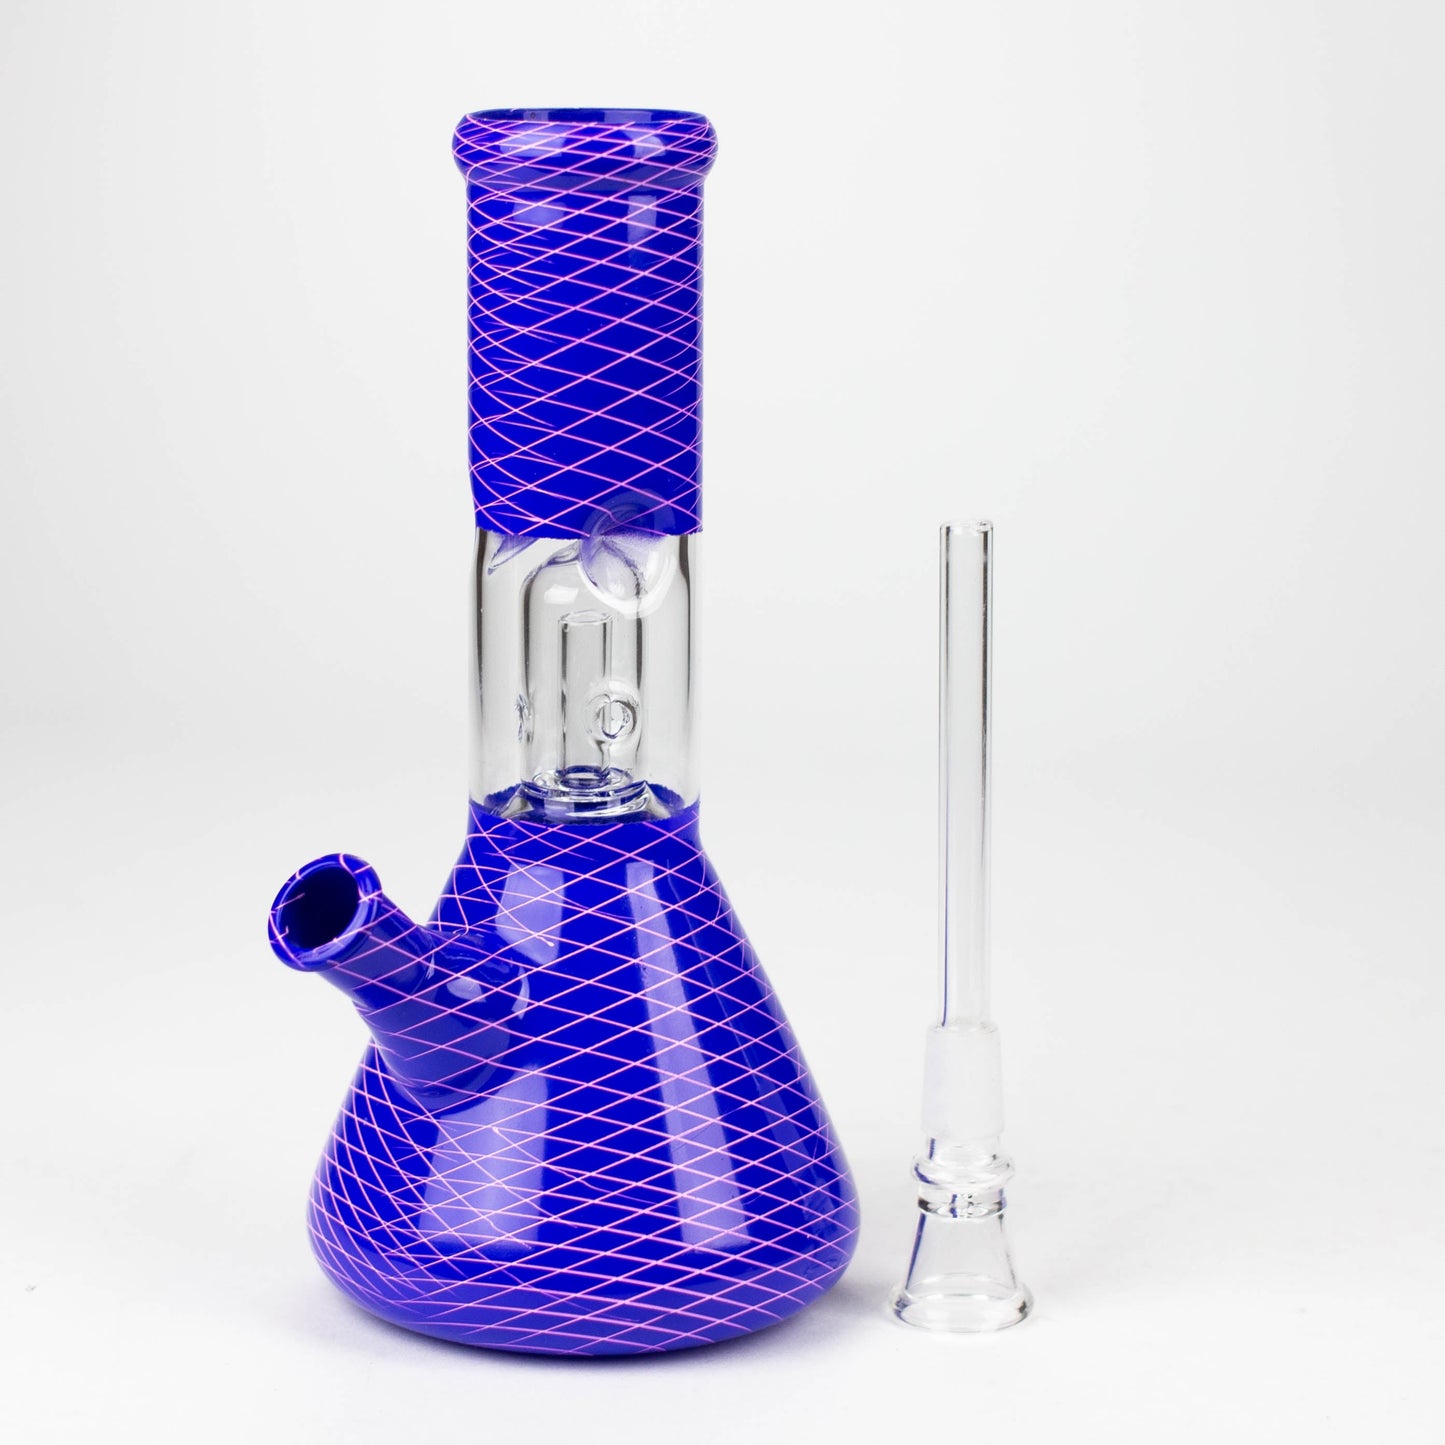 8" Water pipe with Percolator_12